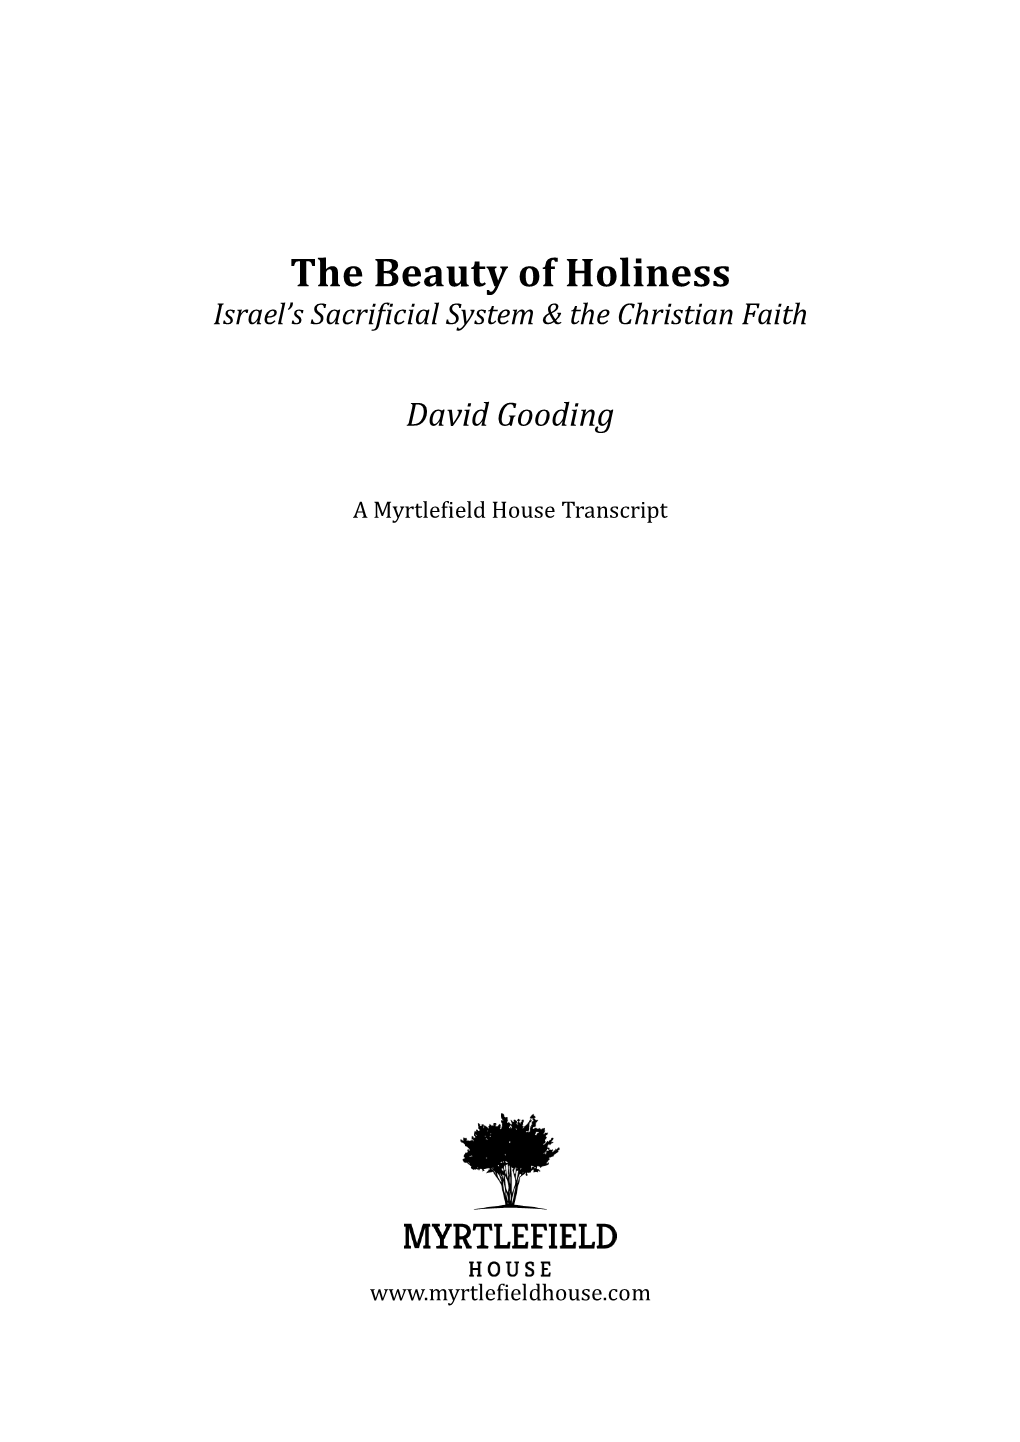 The Beauty of Holiness: Israel's Sacrificial